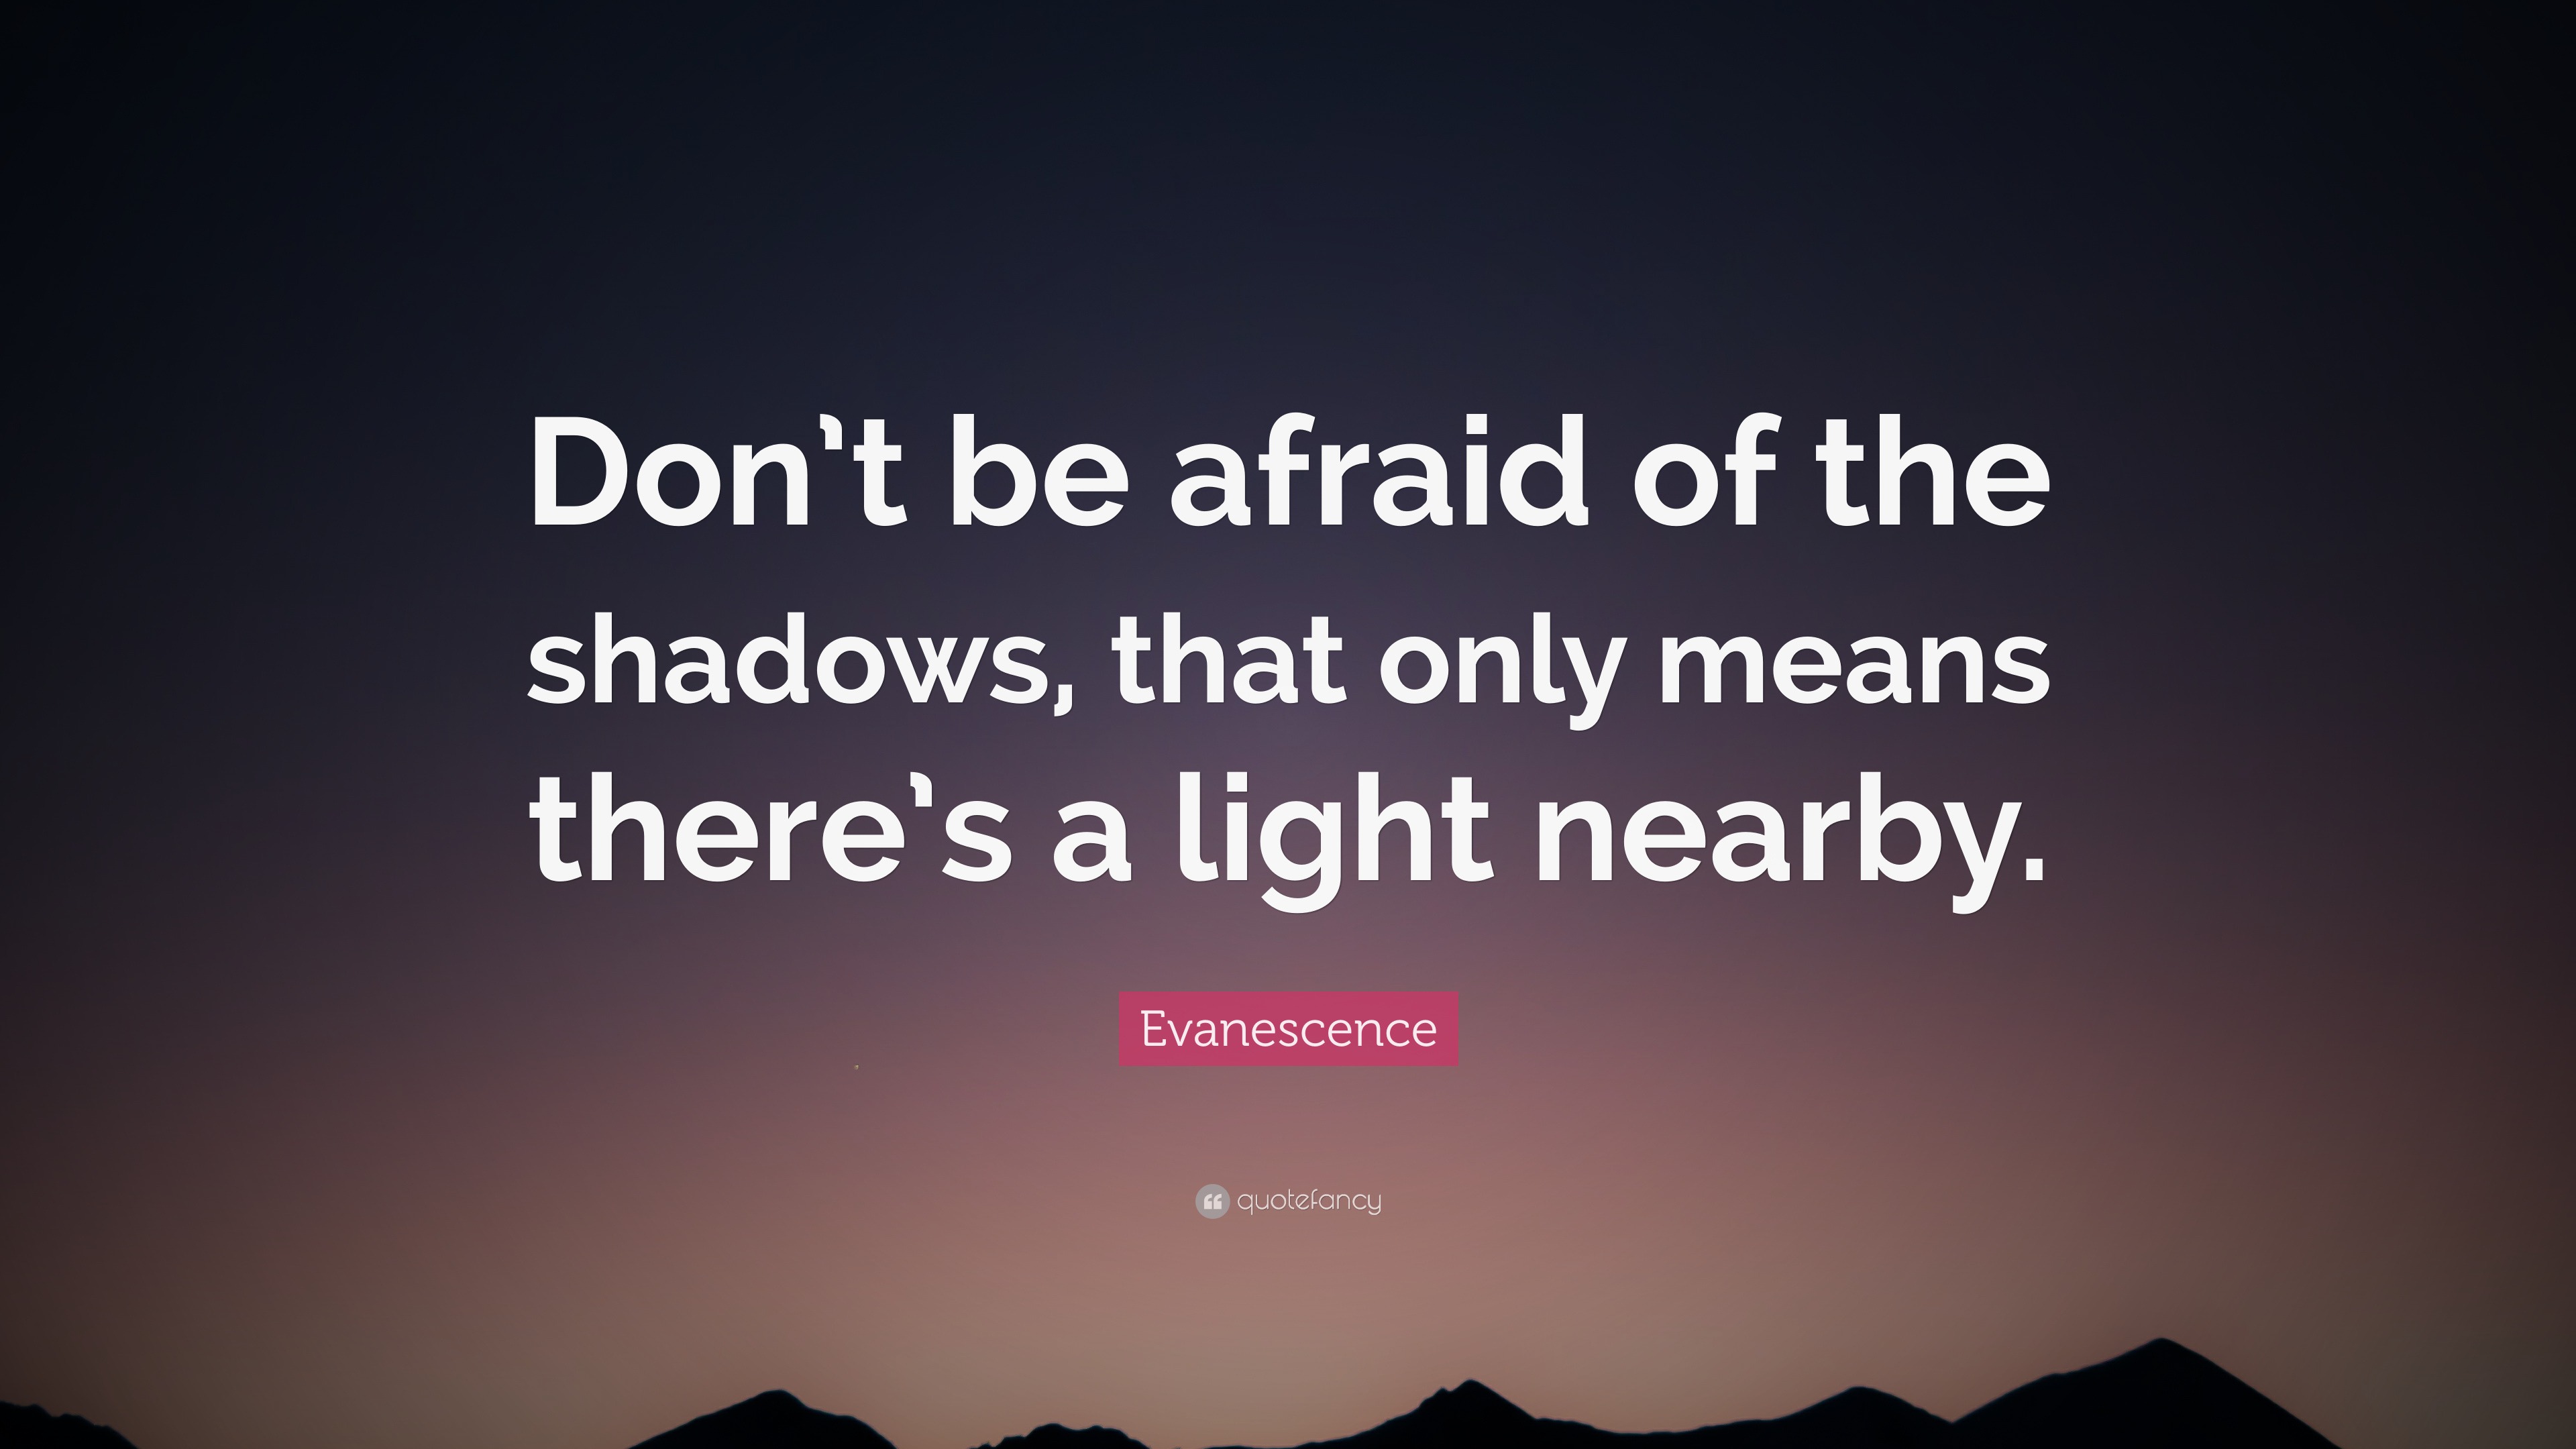 Evanescence Quote: “Don’t be afraid of the shadows, that only means ...